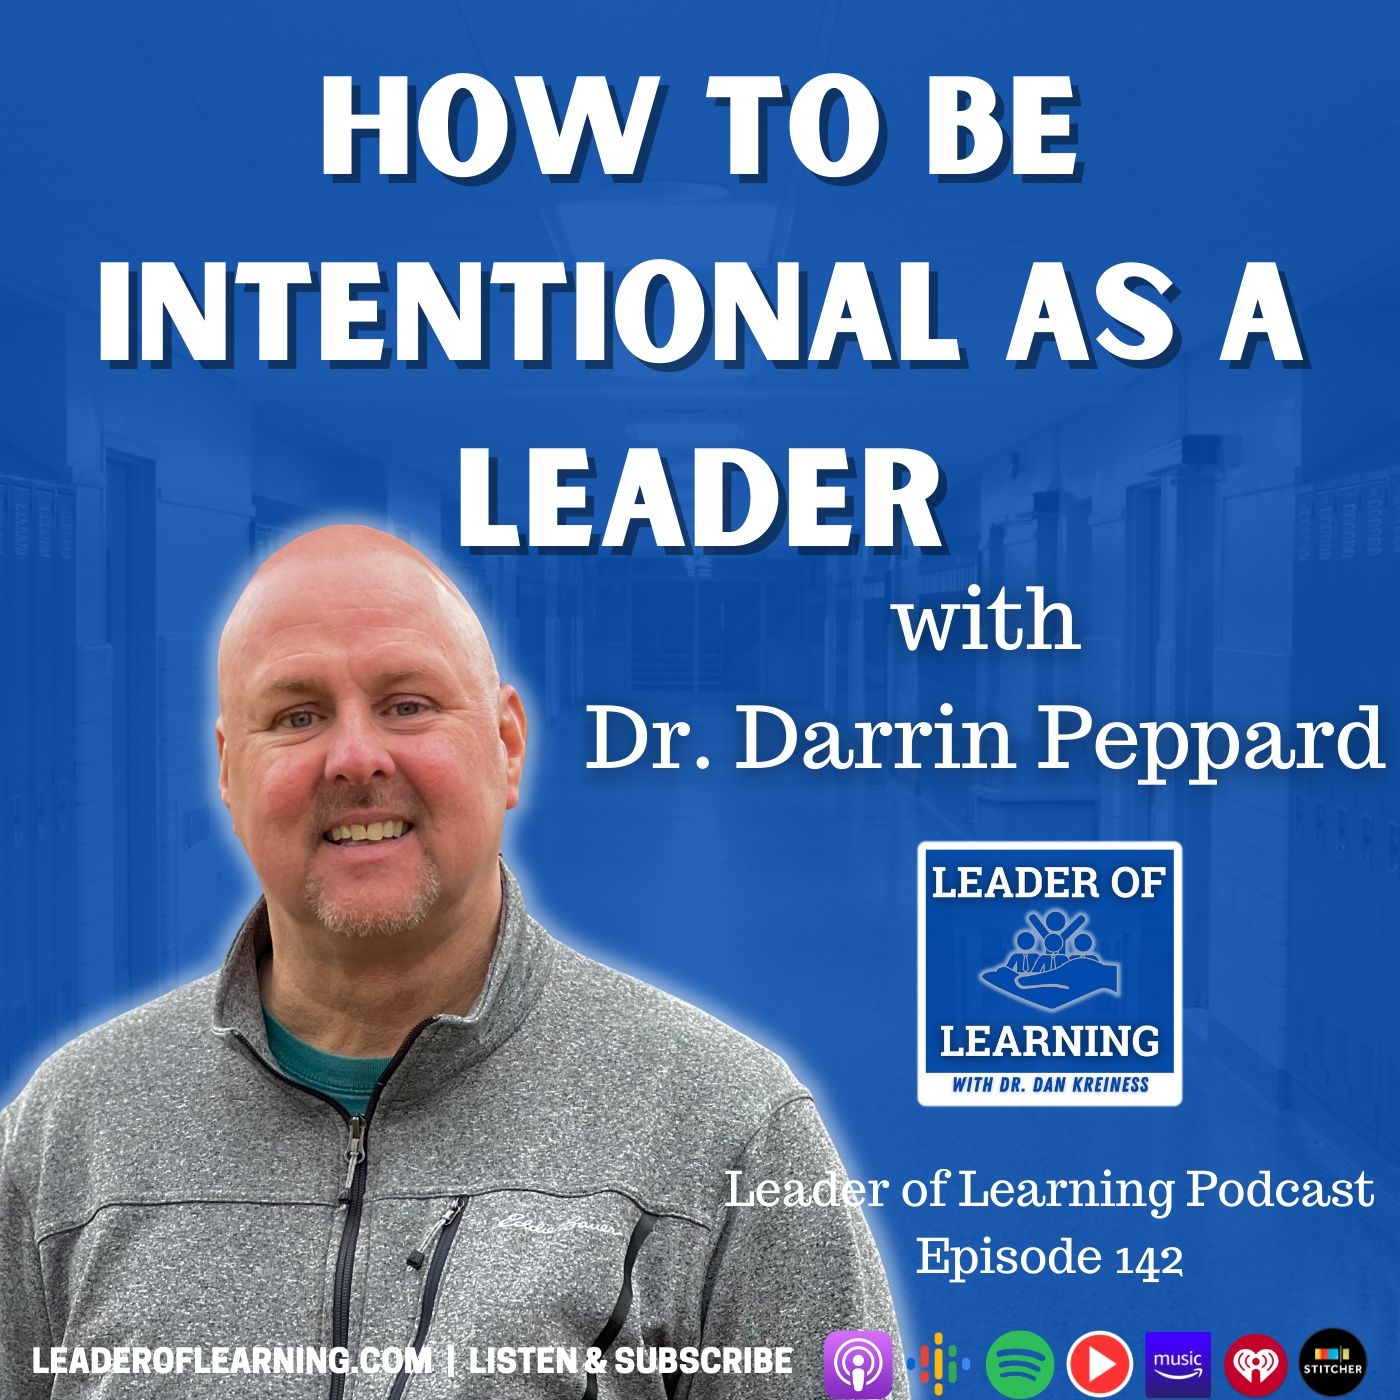 How to be Intentional as a Leader with Dr. Darrin Peppard Image